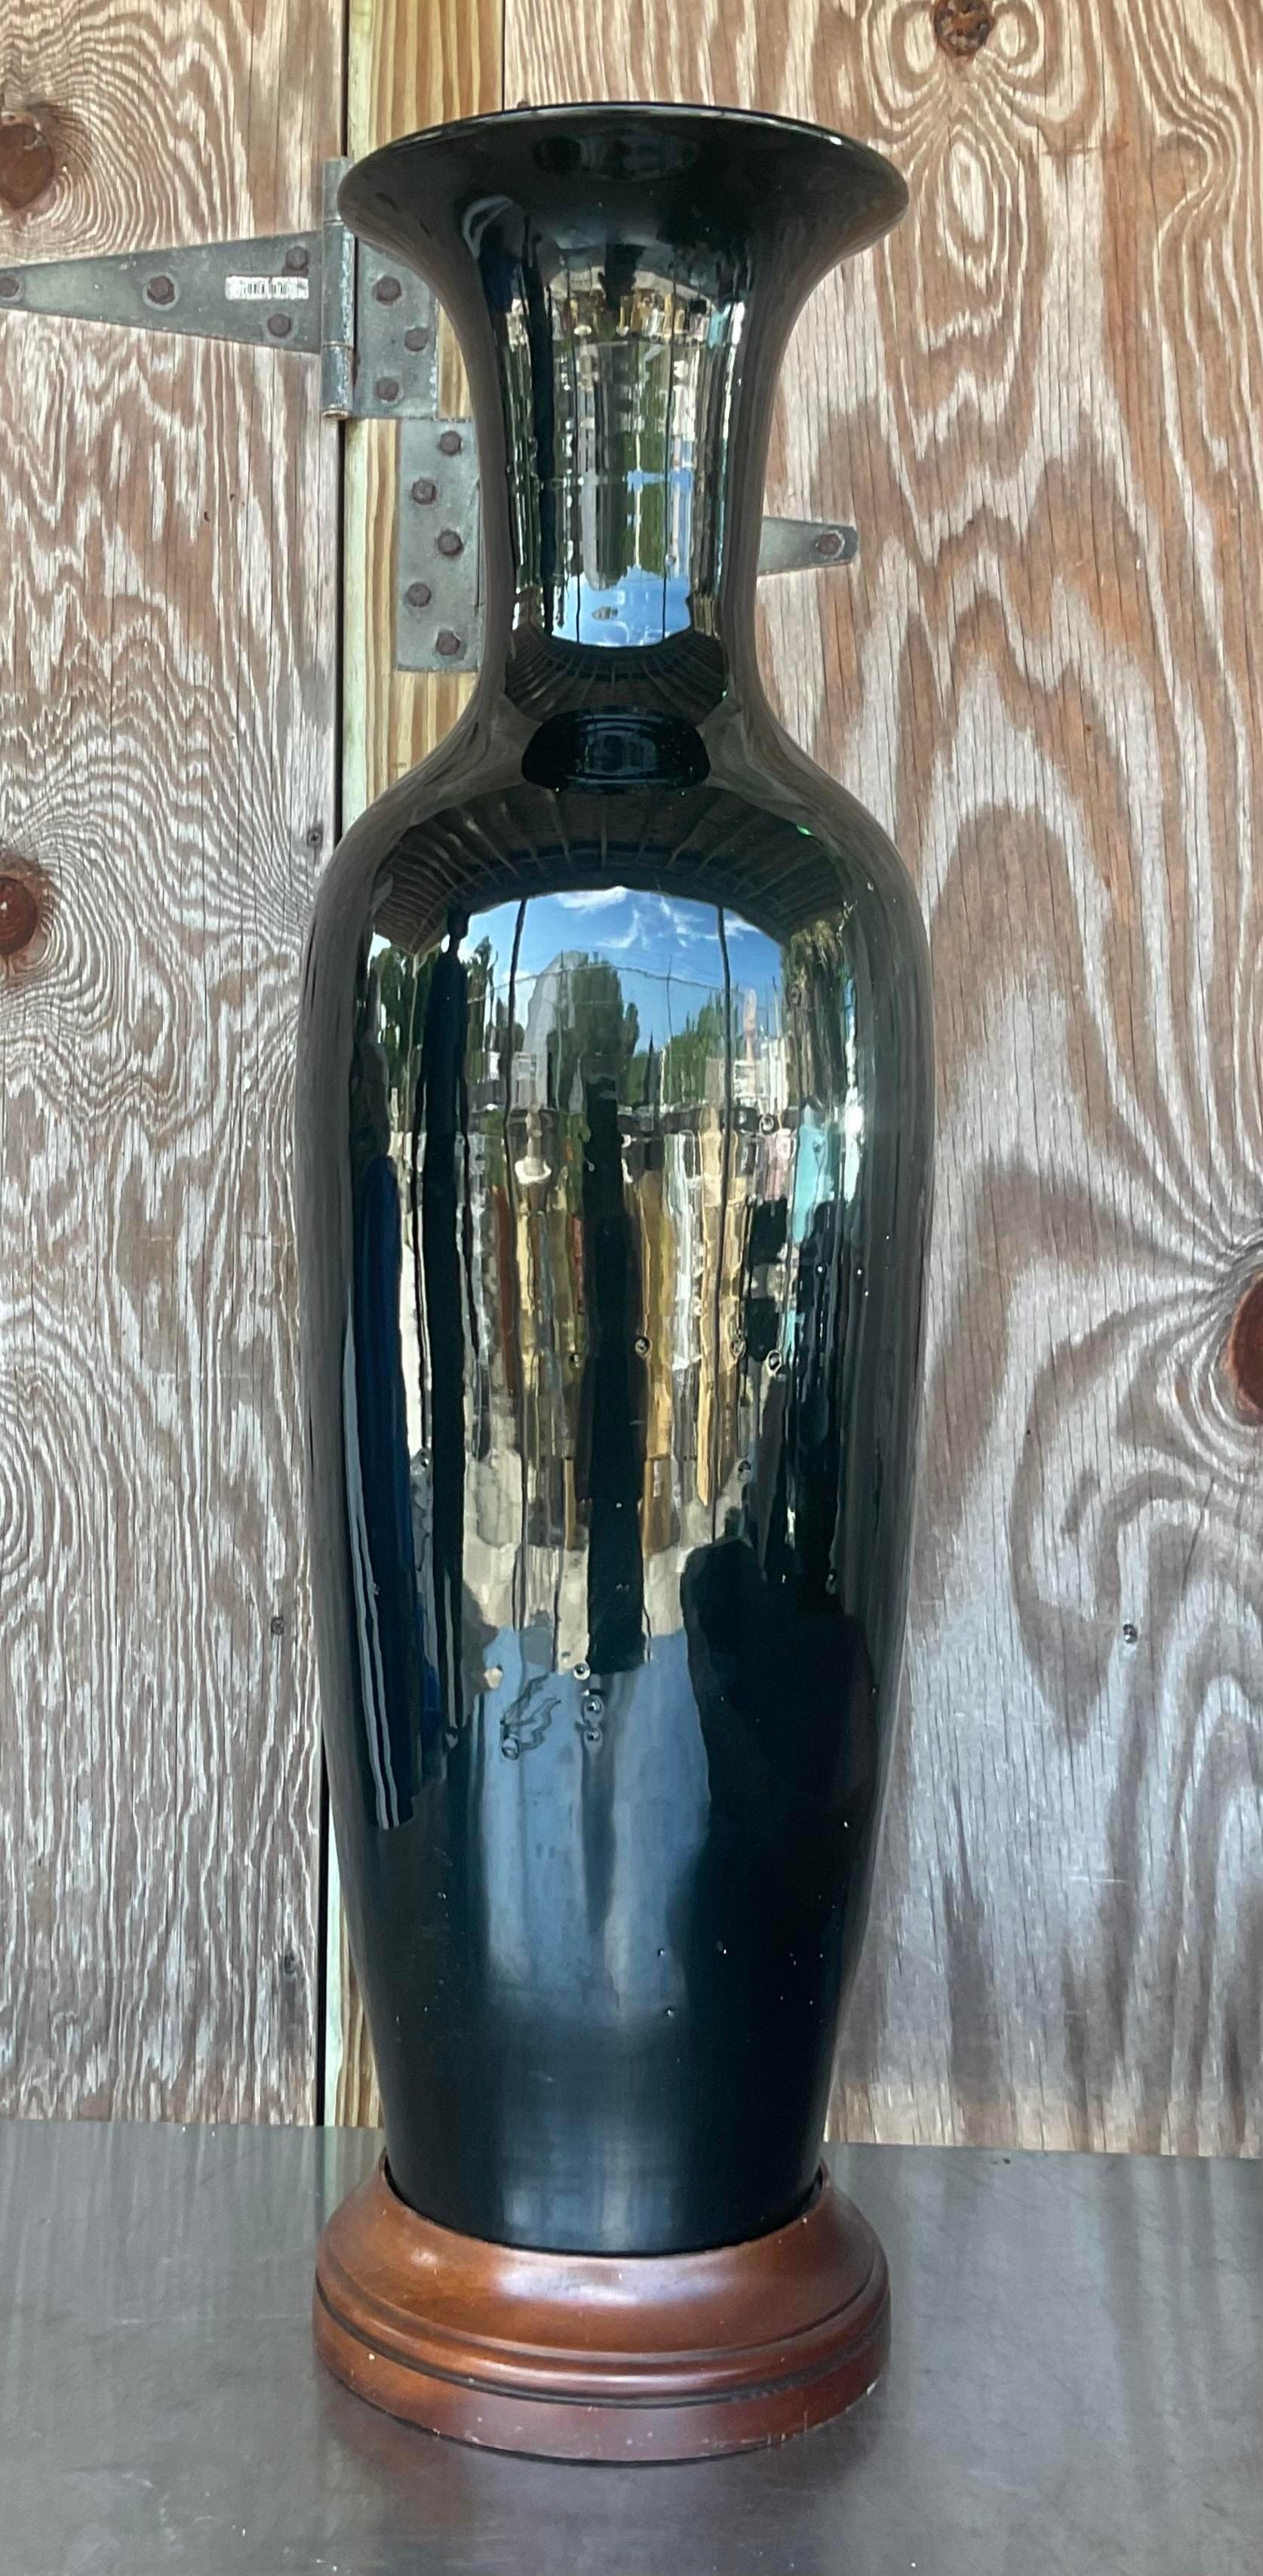 A fabulous vintage Boho Glazed ceramic vase. A classic Ming style in a black high gloss finish. Rests on a wooden plinth. Acquired from a Palm Beach estate. 